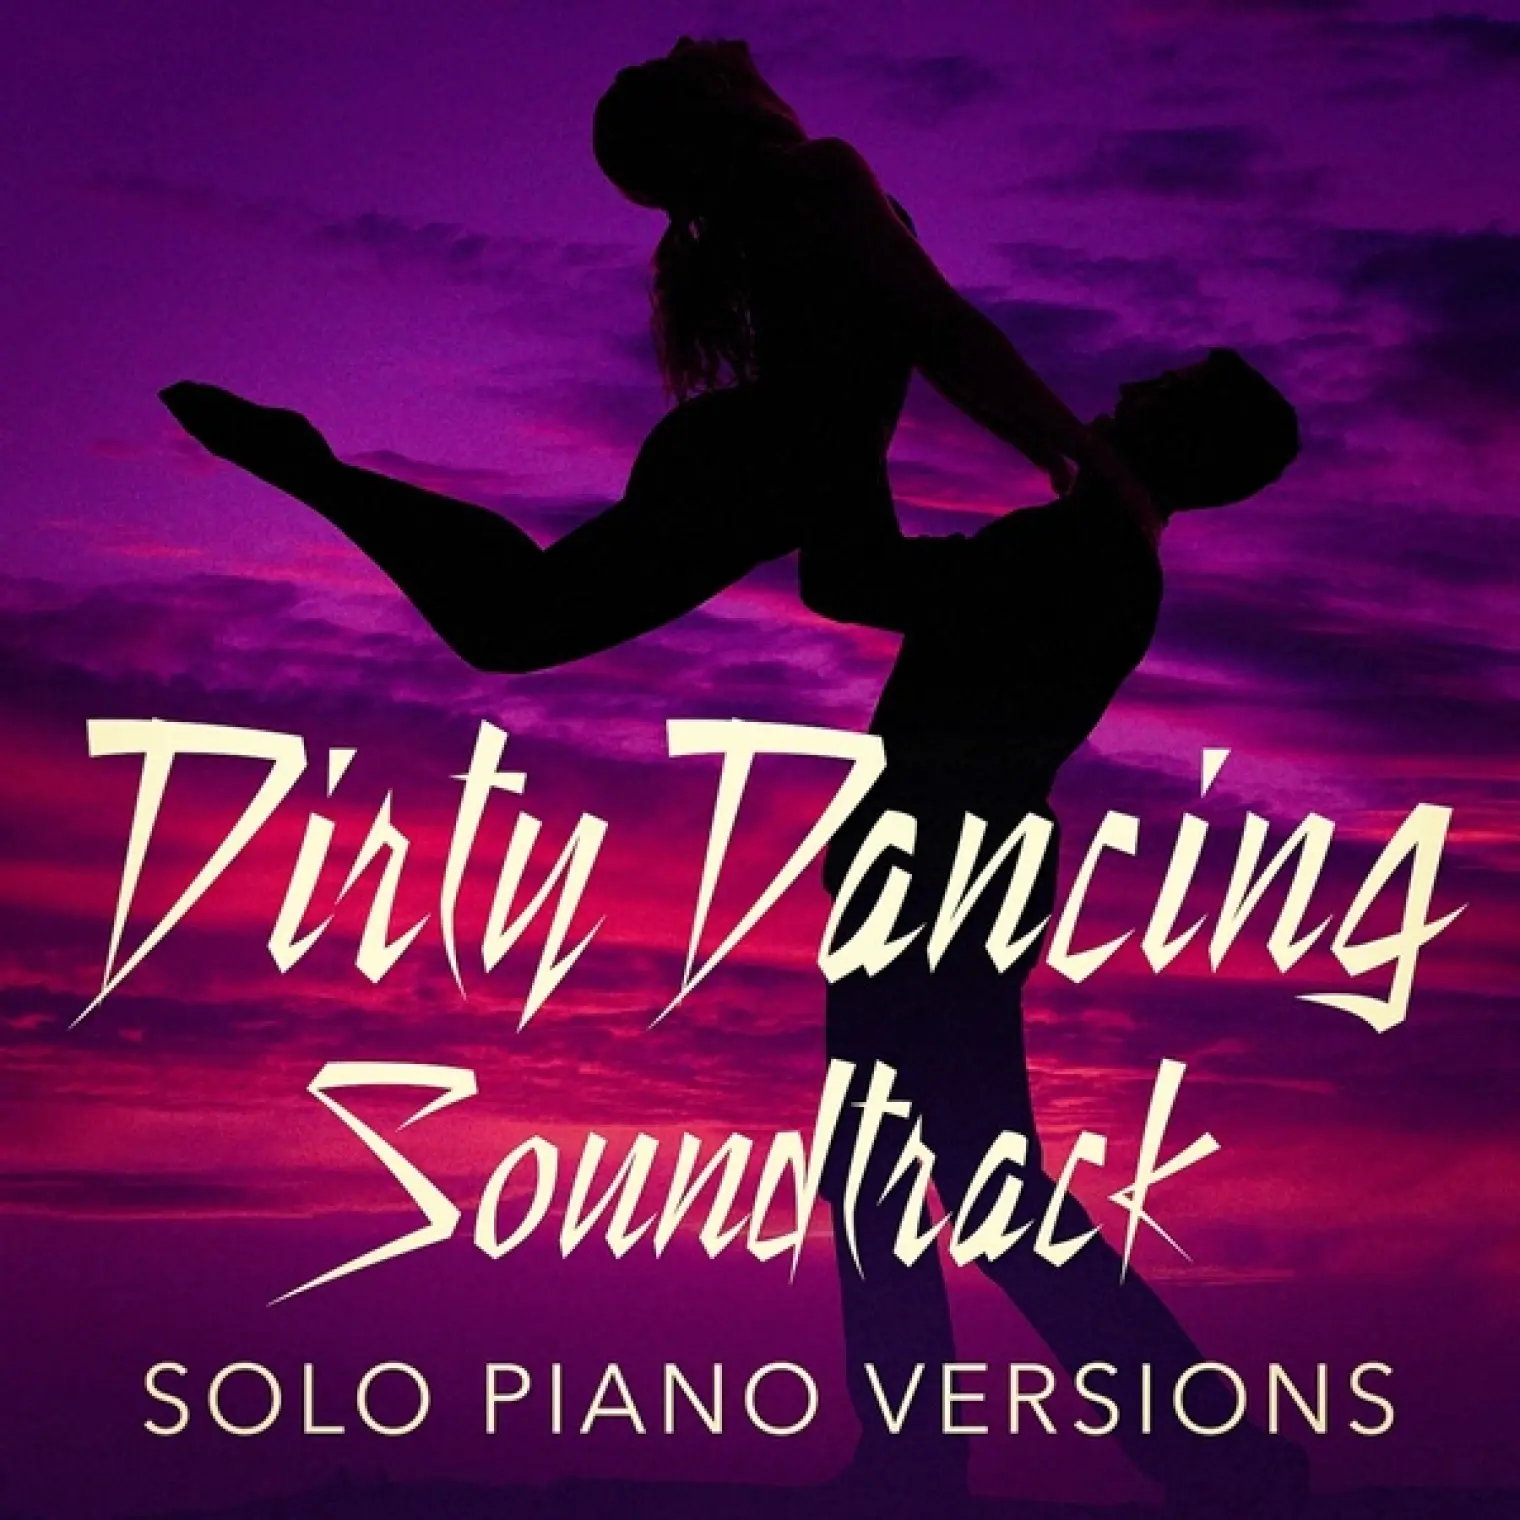 Dirty Dancing Soundtrack (Solo Piano Versions) -  Soundtrack 